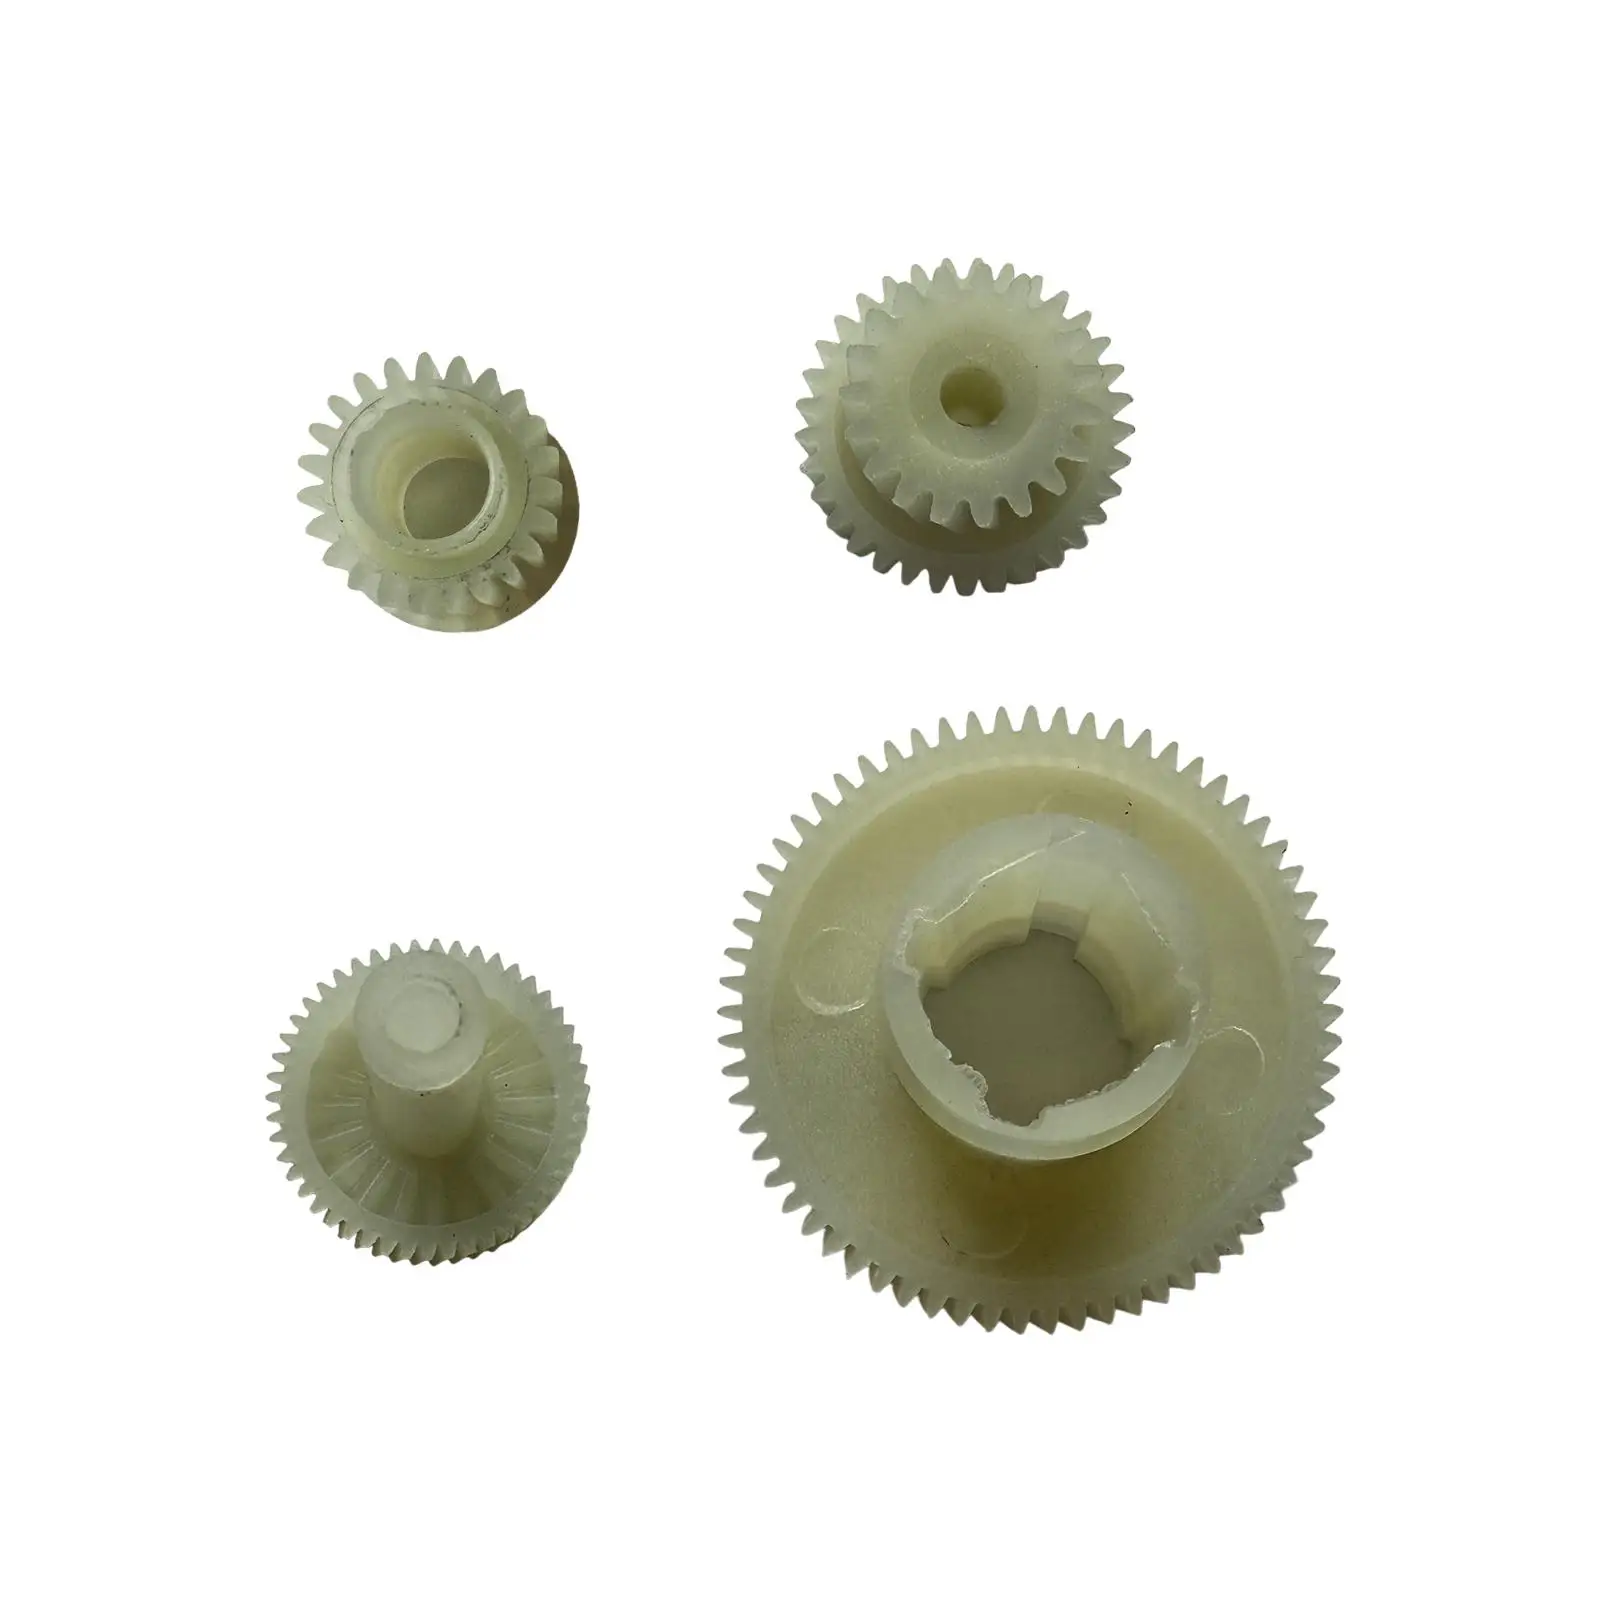 Parking Hand Brake Actuator Gear Repair Kit Easy Installation High Quality Accessories for Land Rover Range Rover Sport